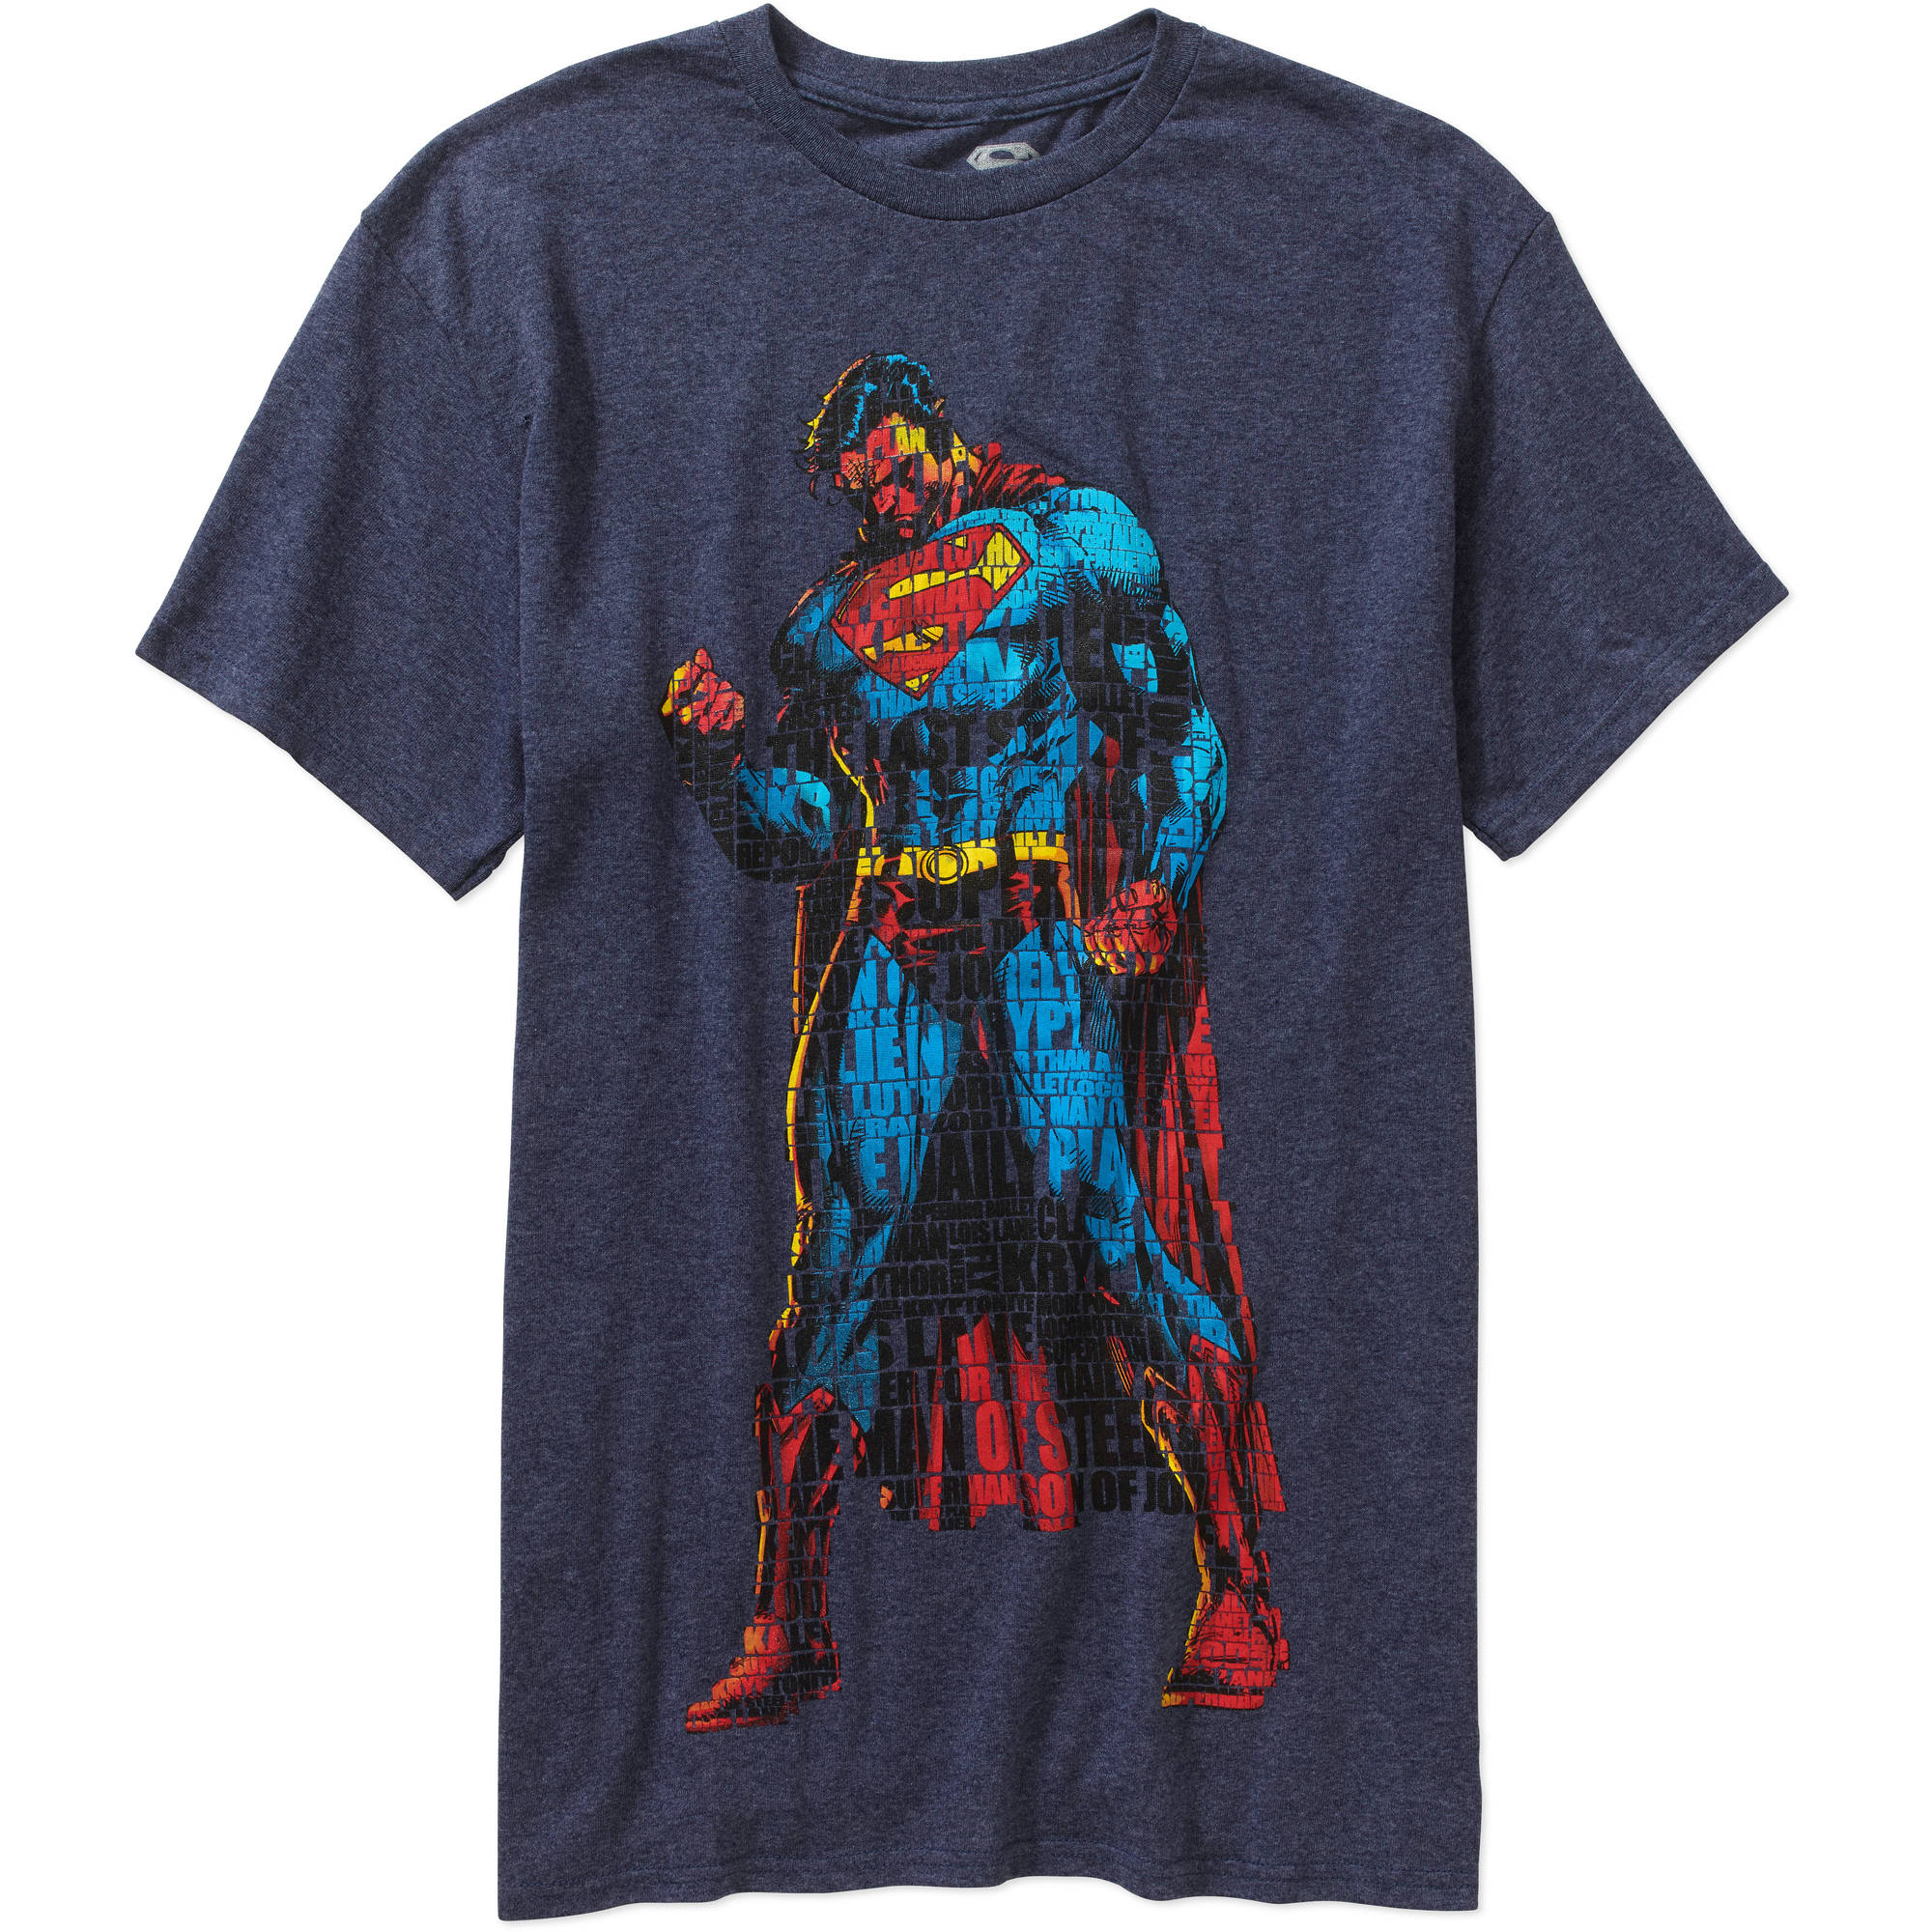 Superman Verbiage Fill Big Men's Graphic Tee - image 1 of 3